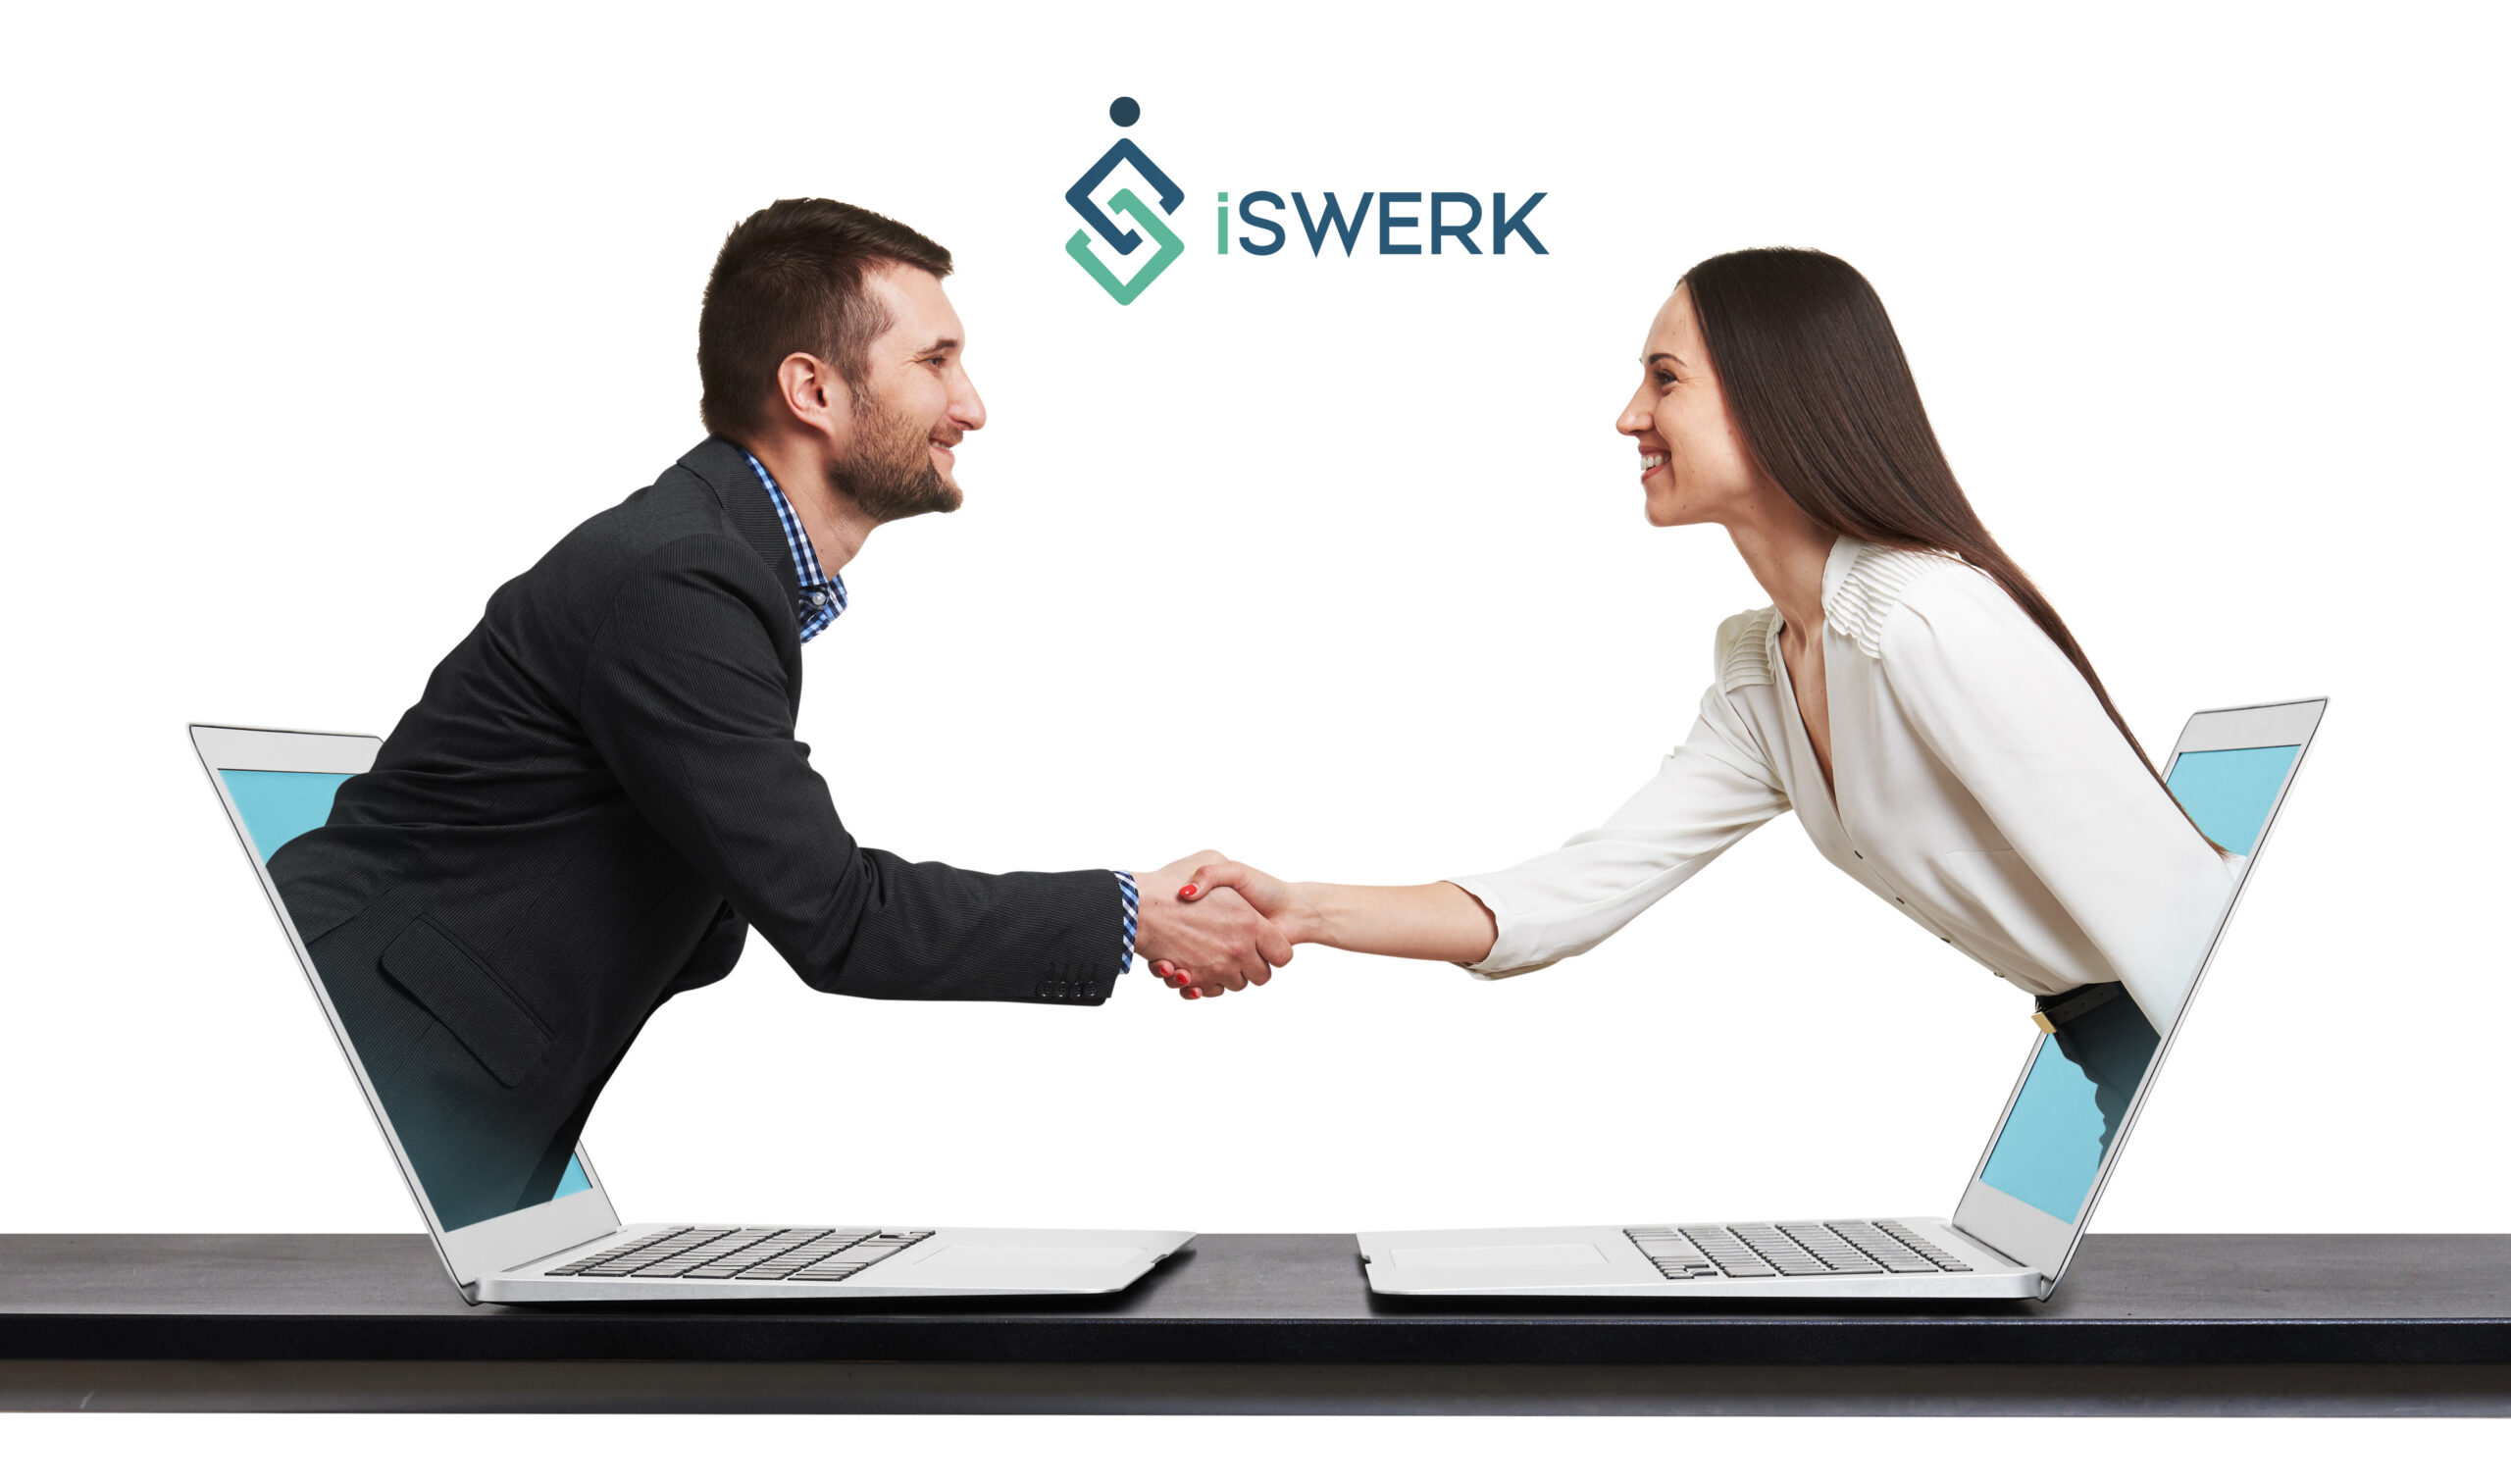 Remote Work - A business owner shaking the hand of iSWerk representative through the screen.